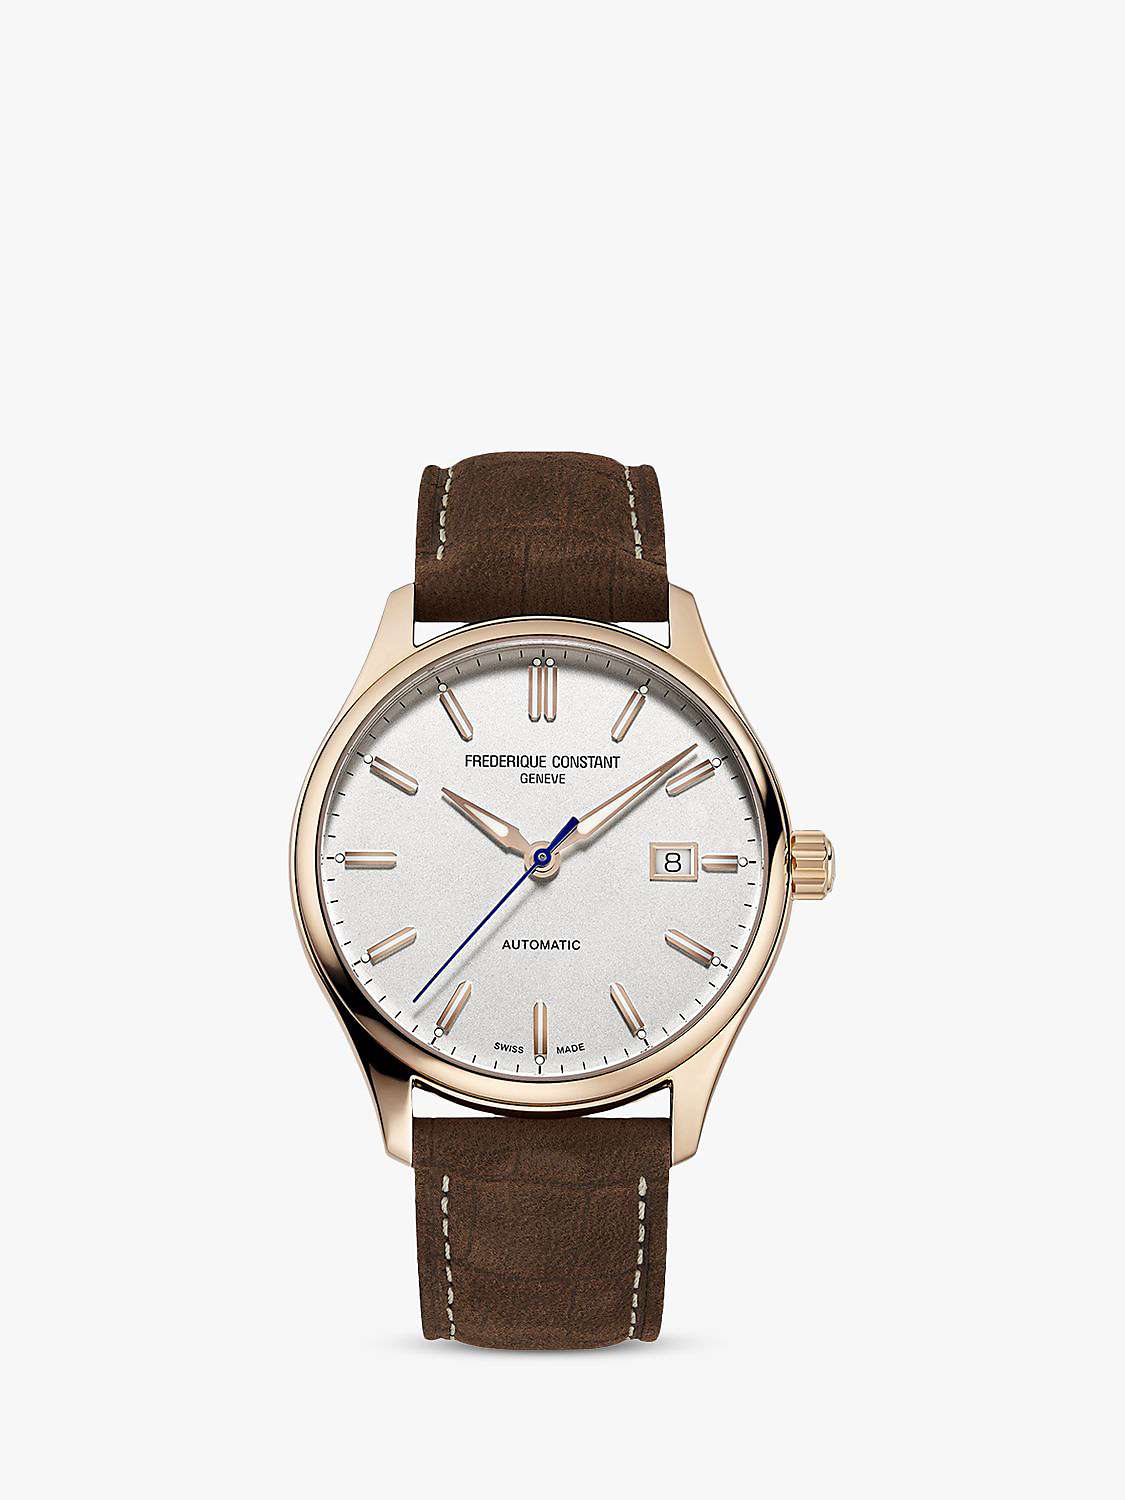 Buy Frederique Constant FC-303NV5B4 Men's Classics Index Automatic Date Leather Strap Watch, Brown/Gold Online at johnlewis.com